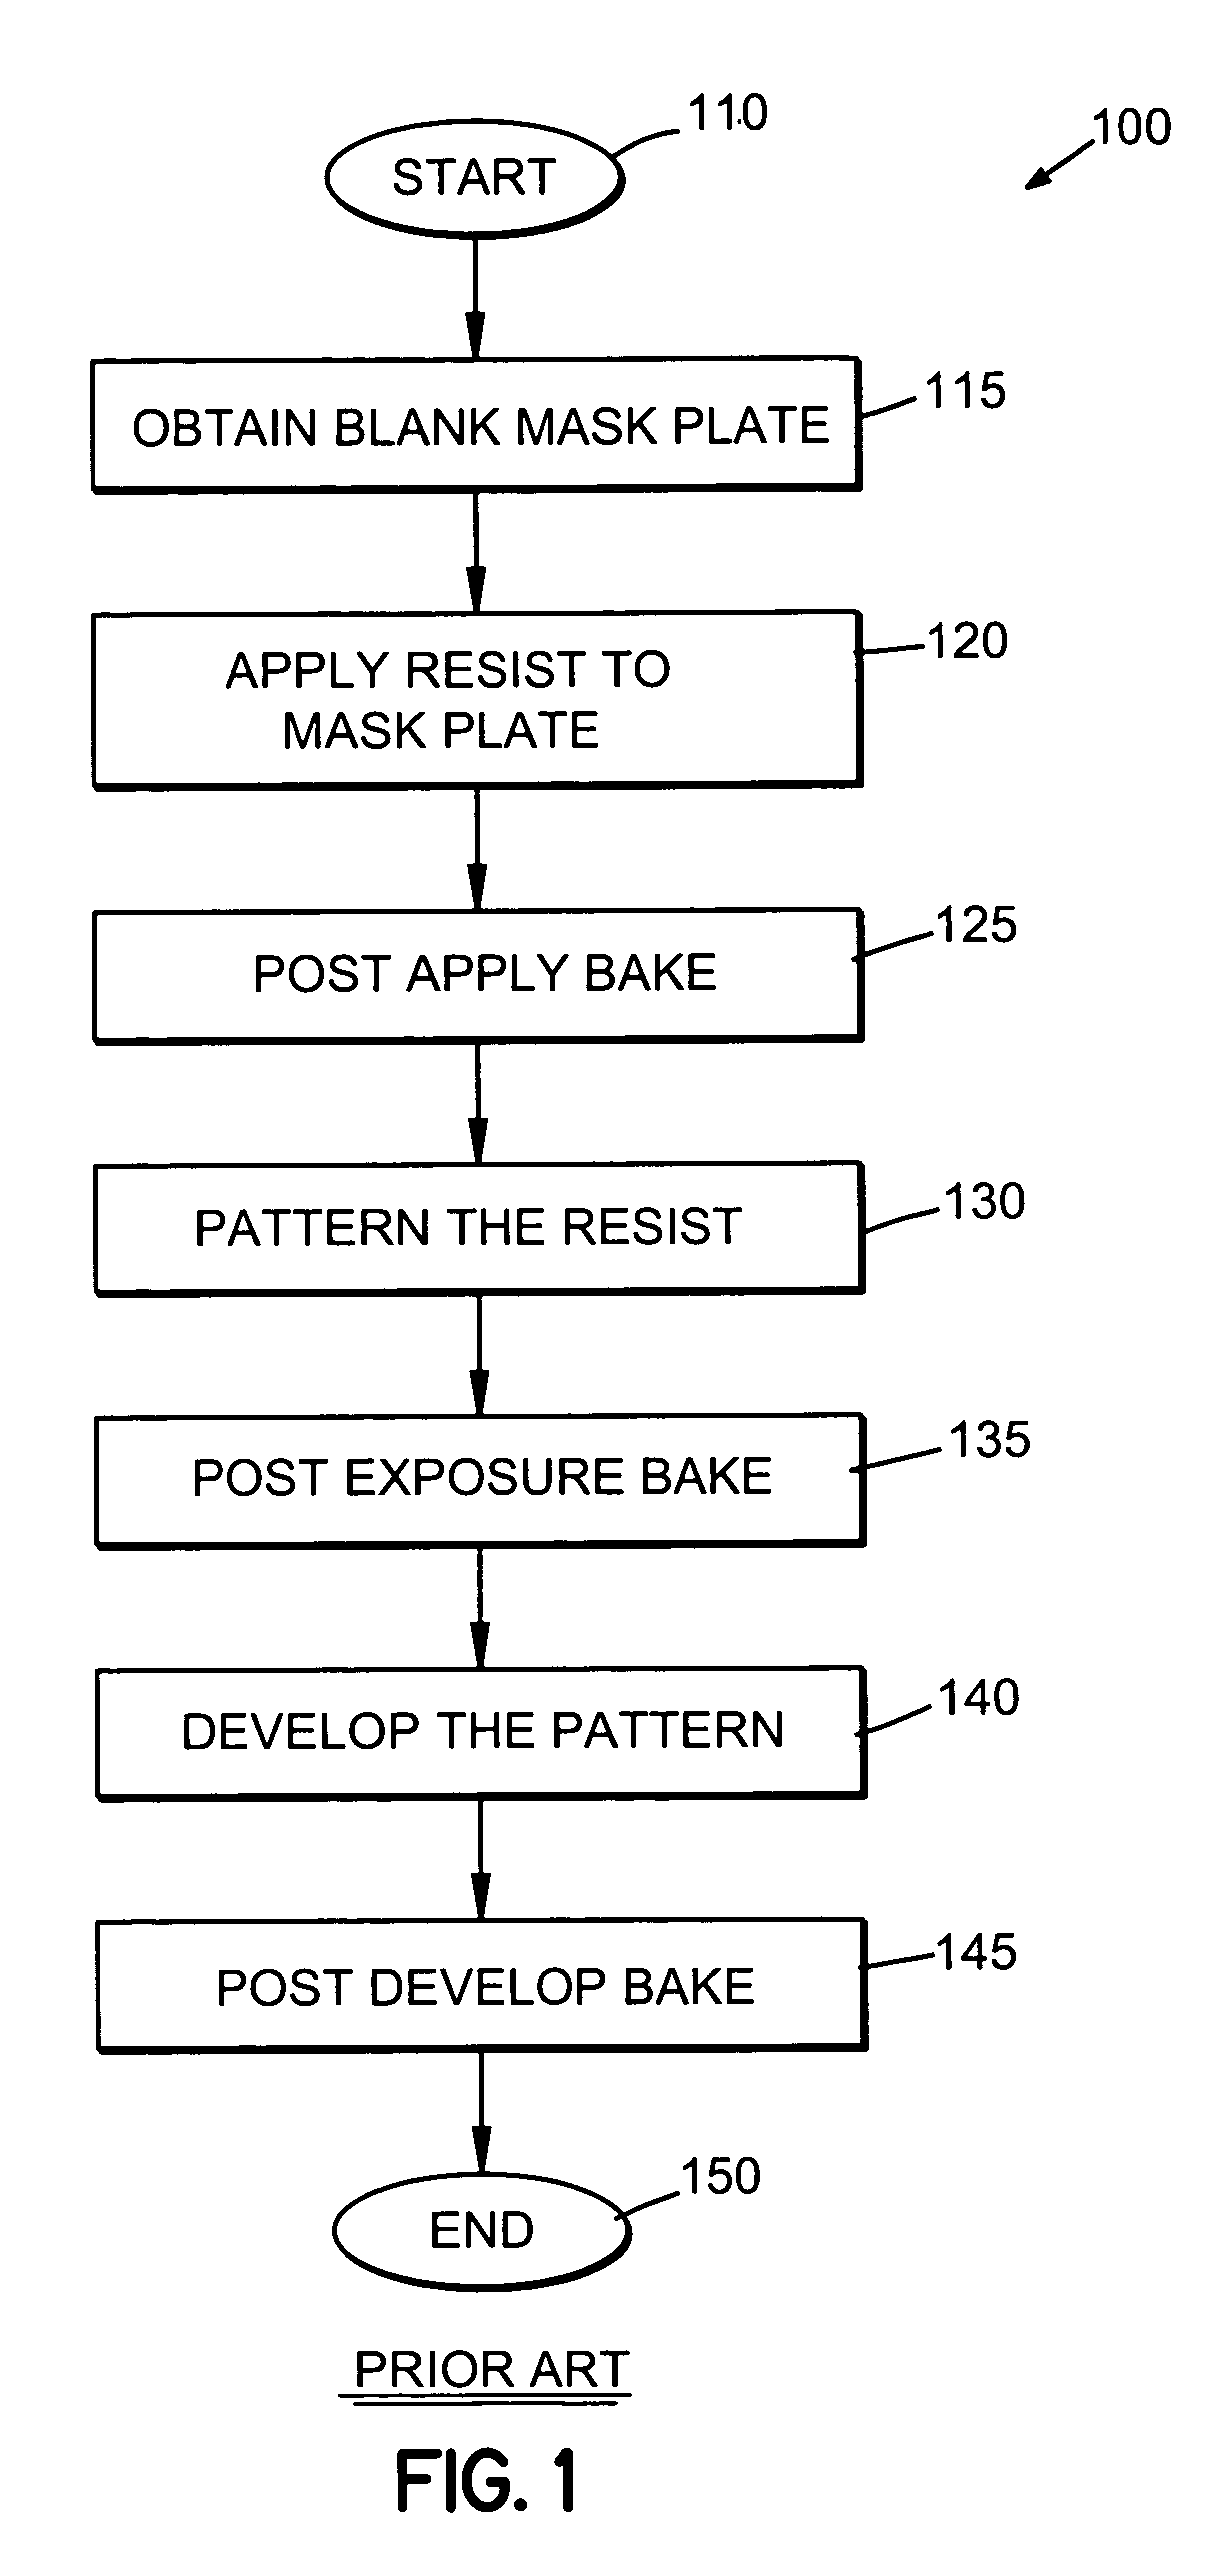 Adaptive real time control of a reticle/mask system